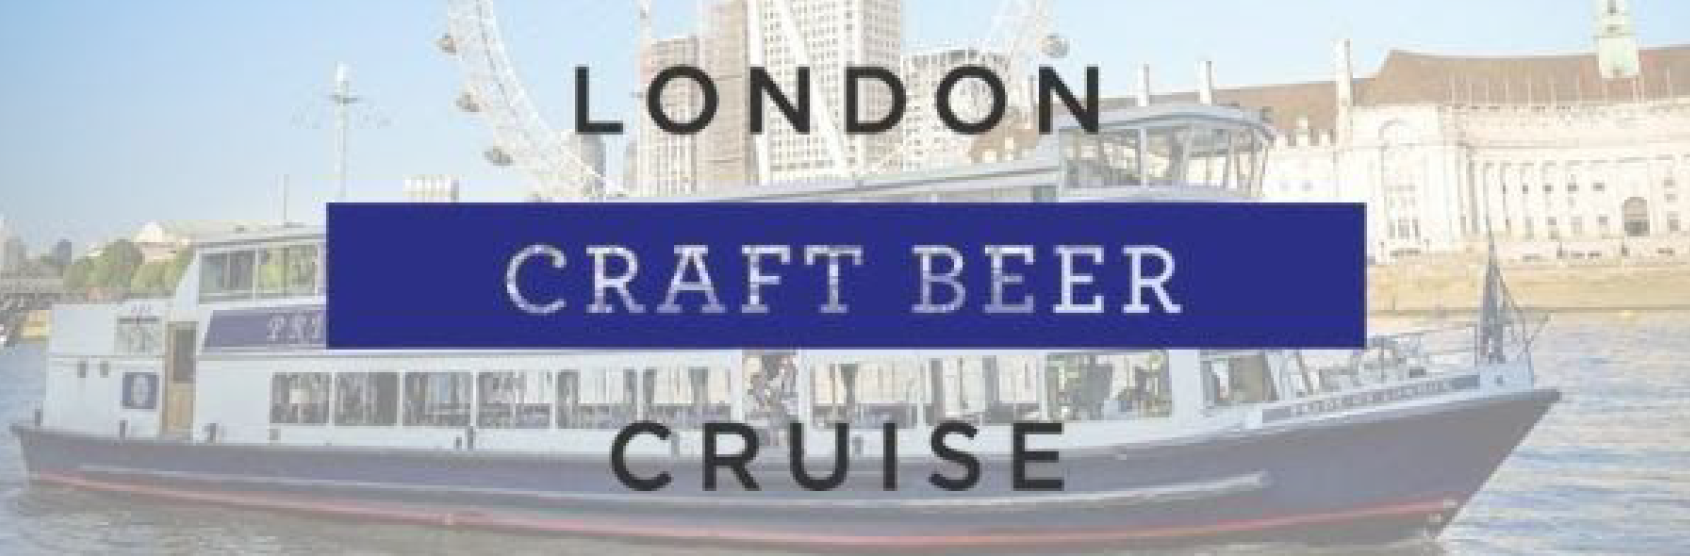 The London Craft Beer Cruise returns for 2020 Discount for Members